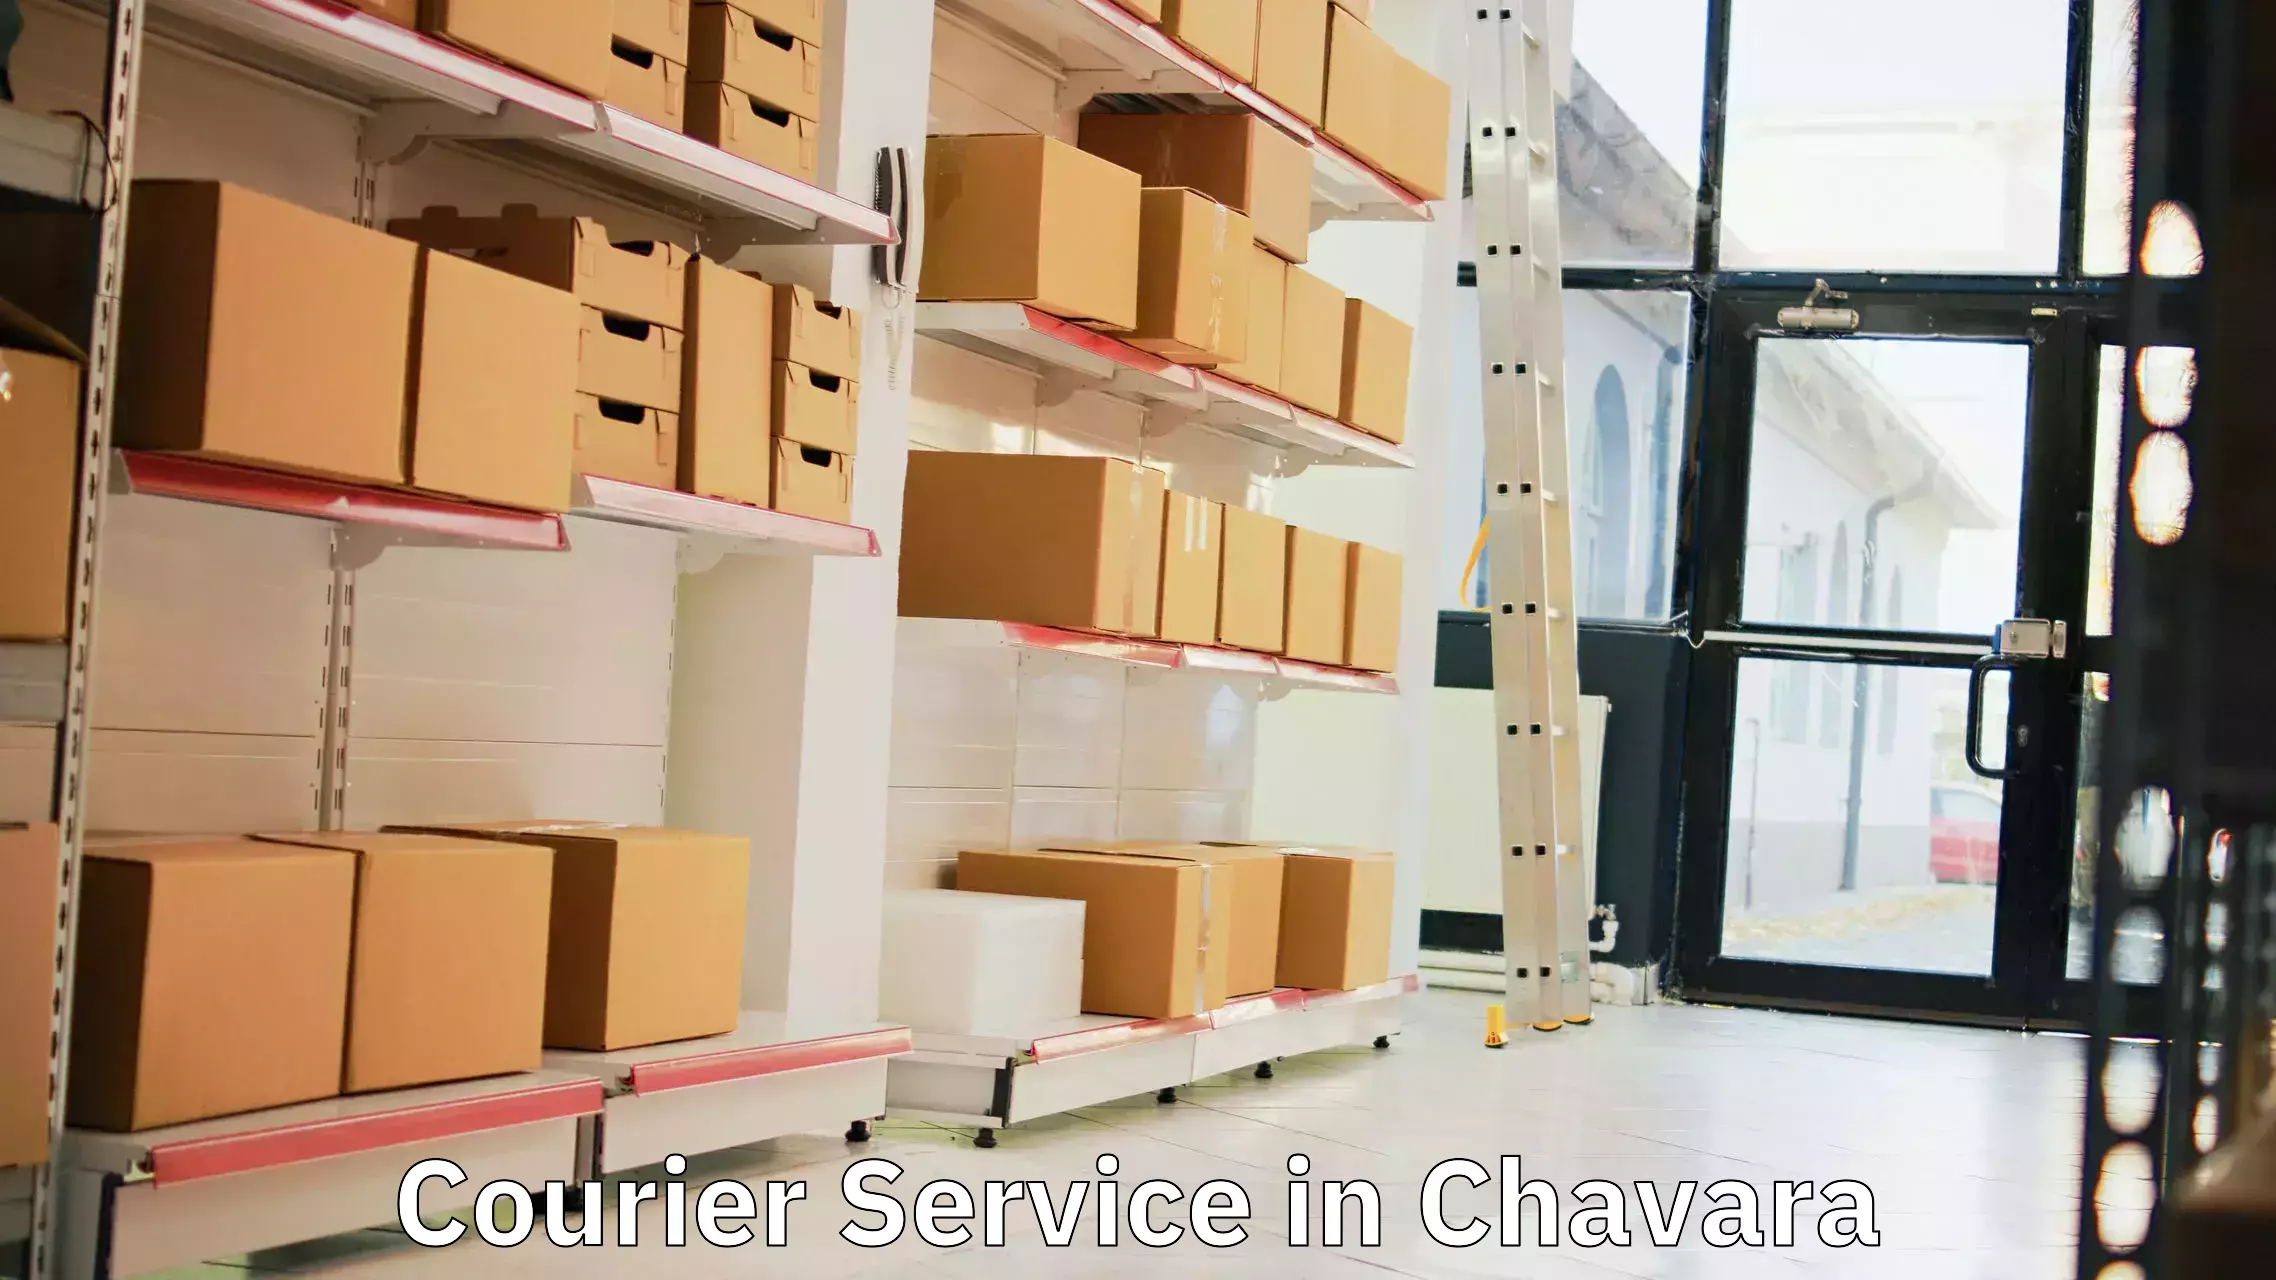 Comprehensive delivery network in Chavara